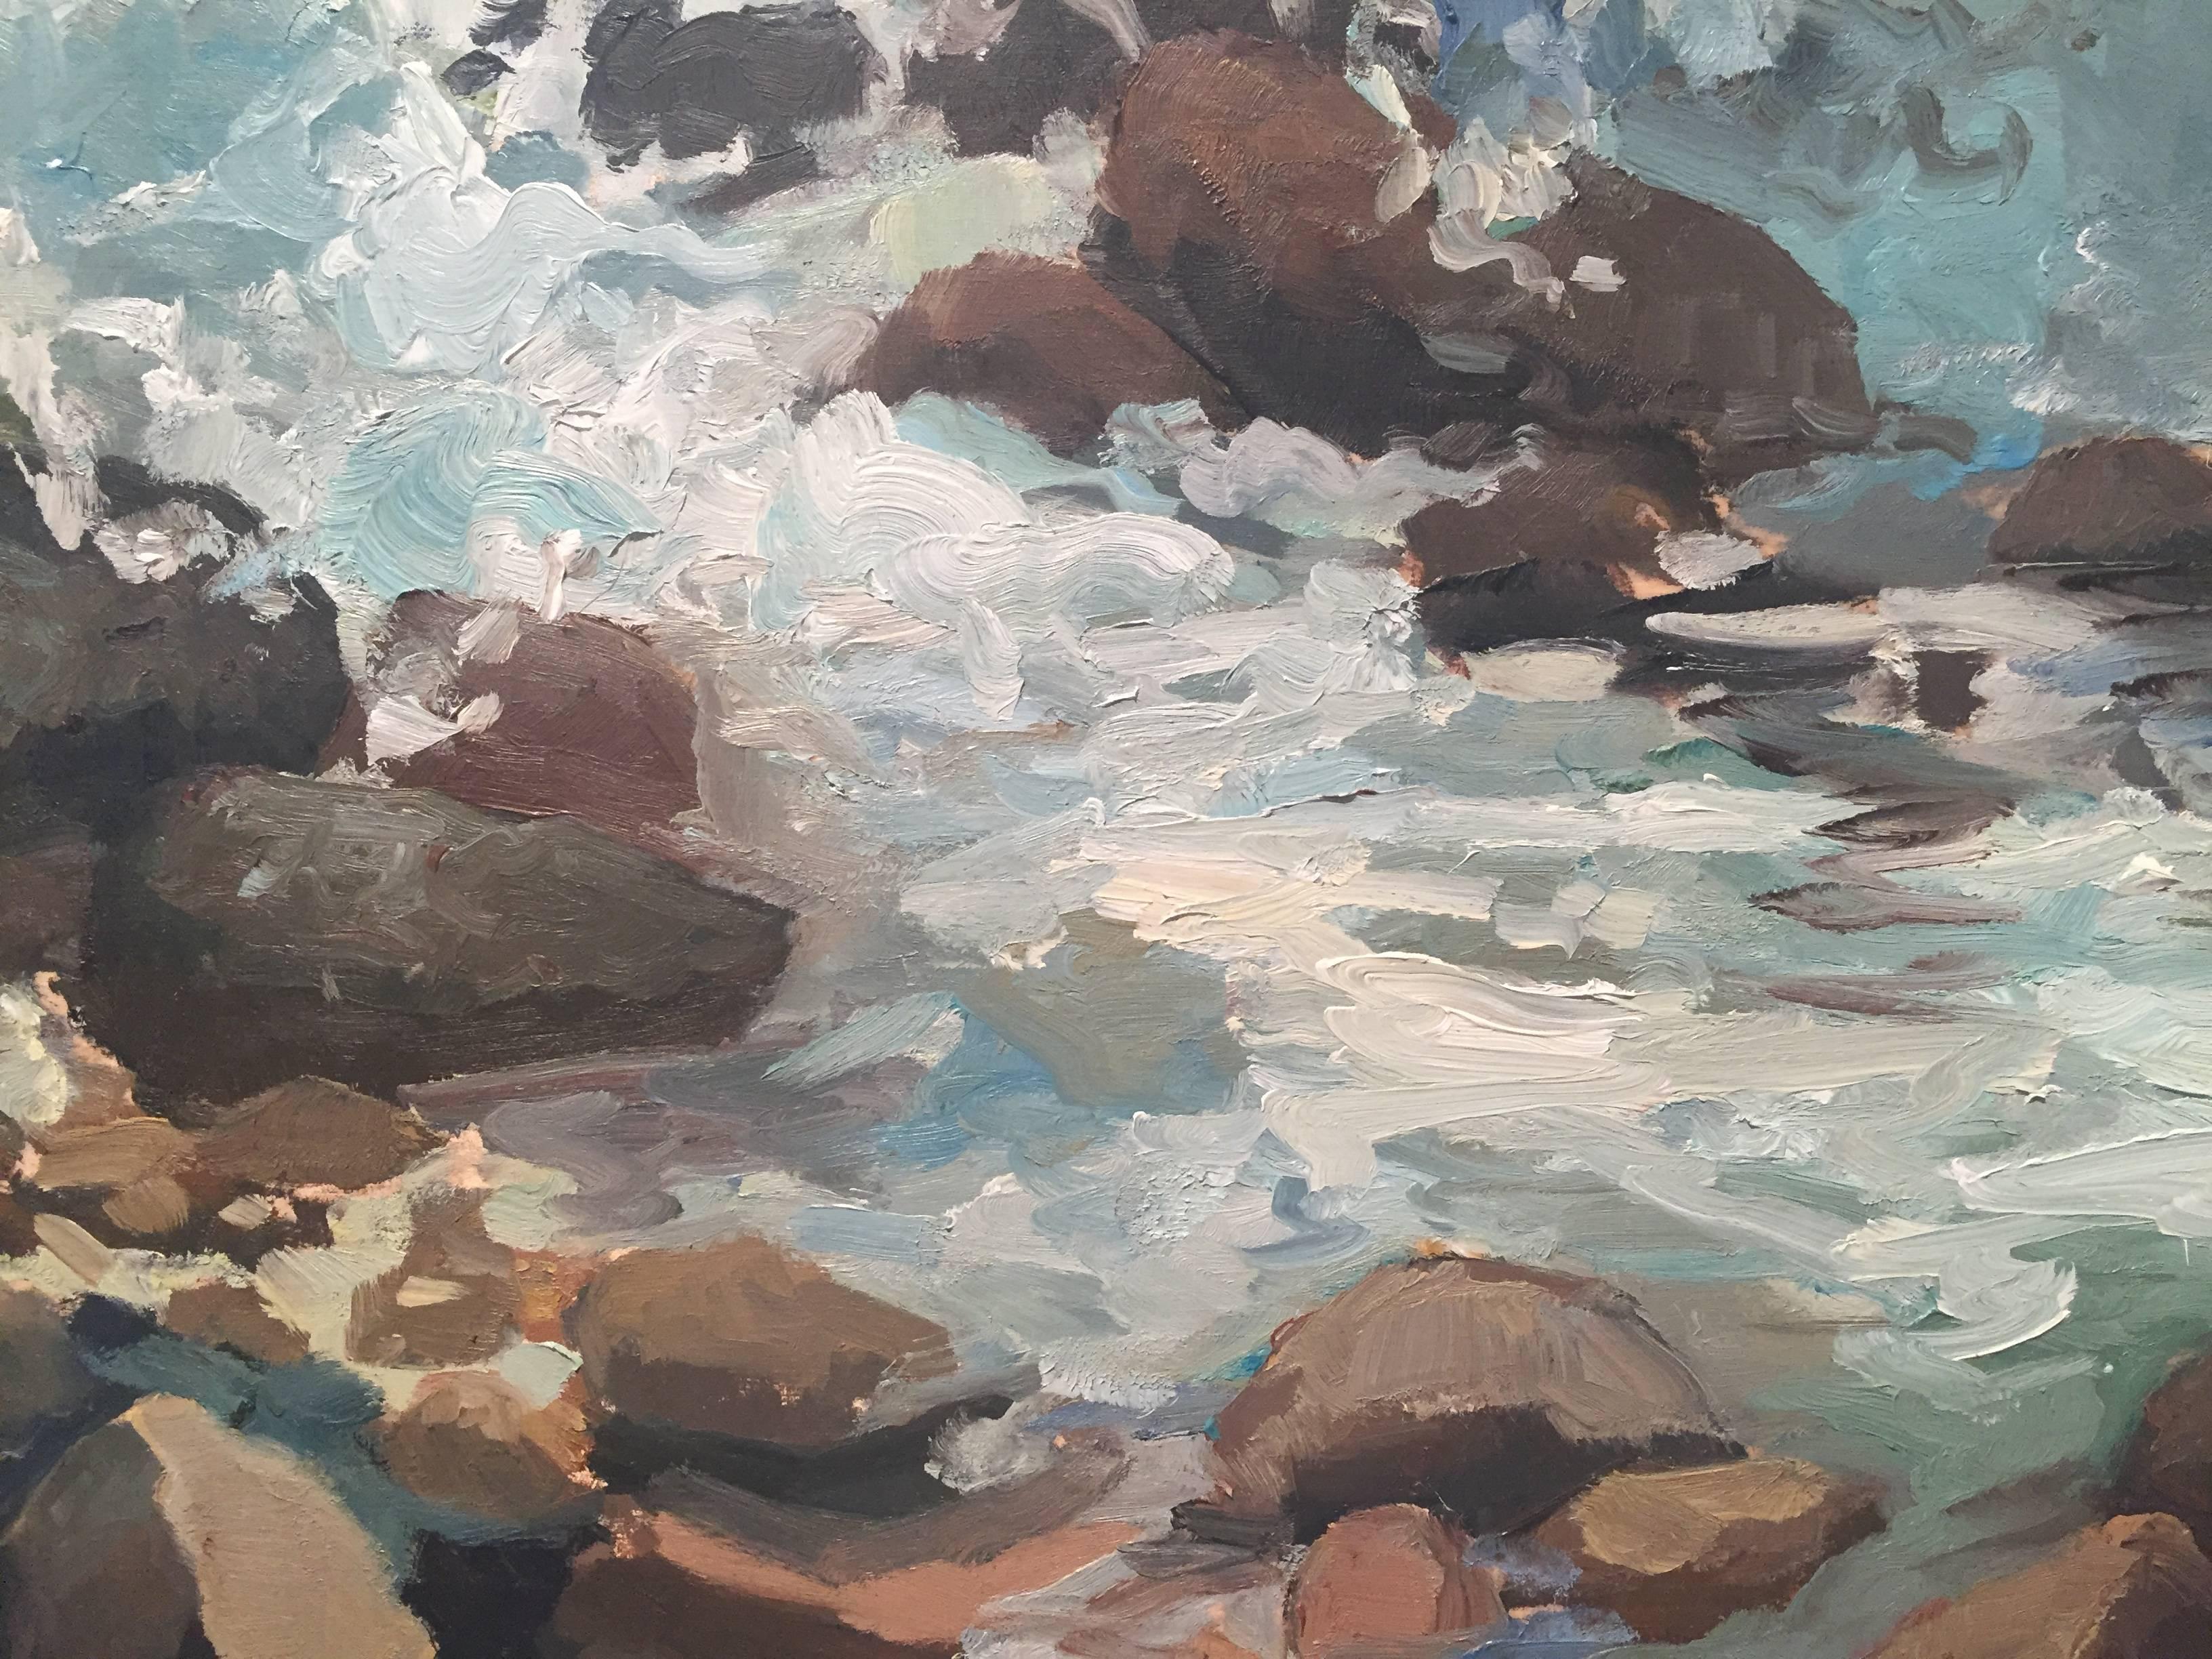 Painted en plein air, on the shore at a Montauk Beach. The Eastern most point of Long Island has a certain light to it, and the water is not just blue, but a strong green too. Waves roll over rocks creating a white spray.

Edwina Lucas was born and